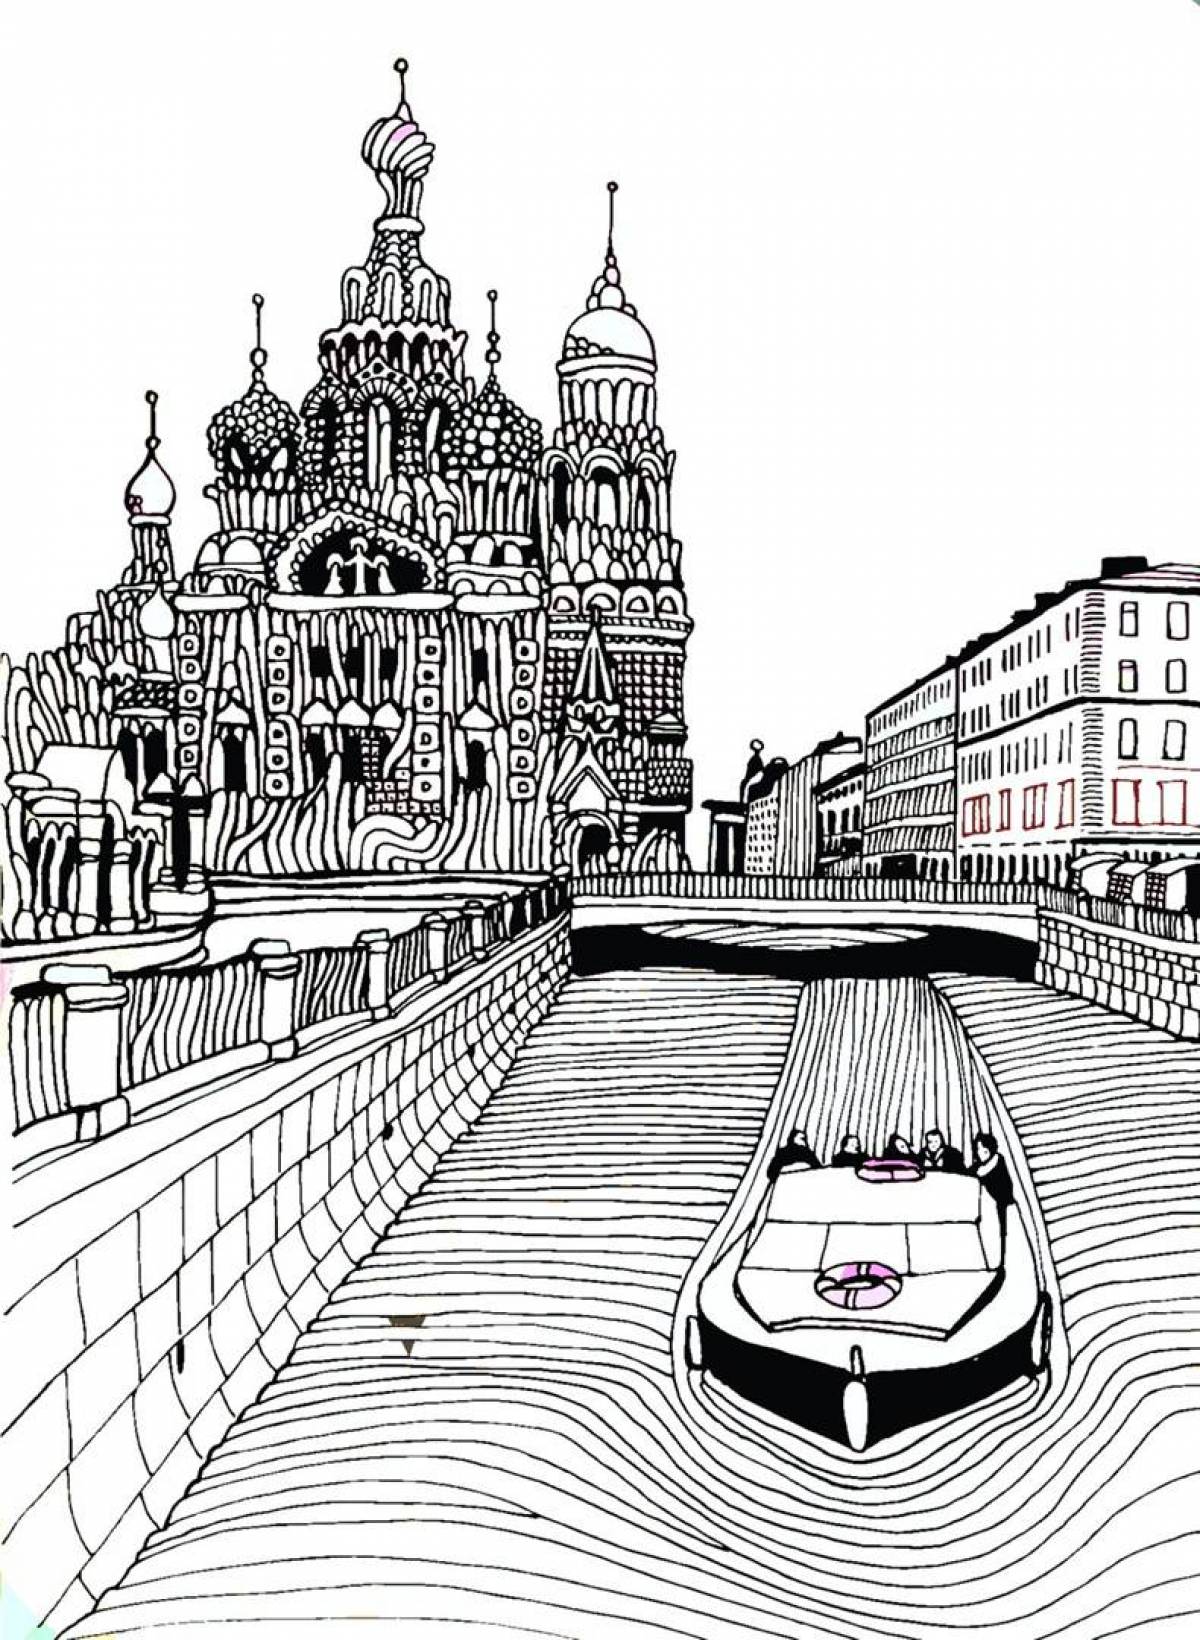 Colourful st. petersburg coloring book